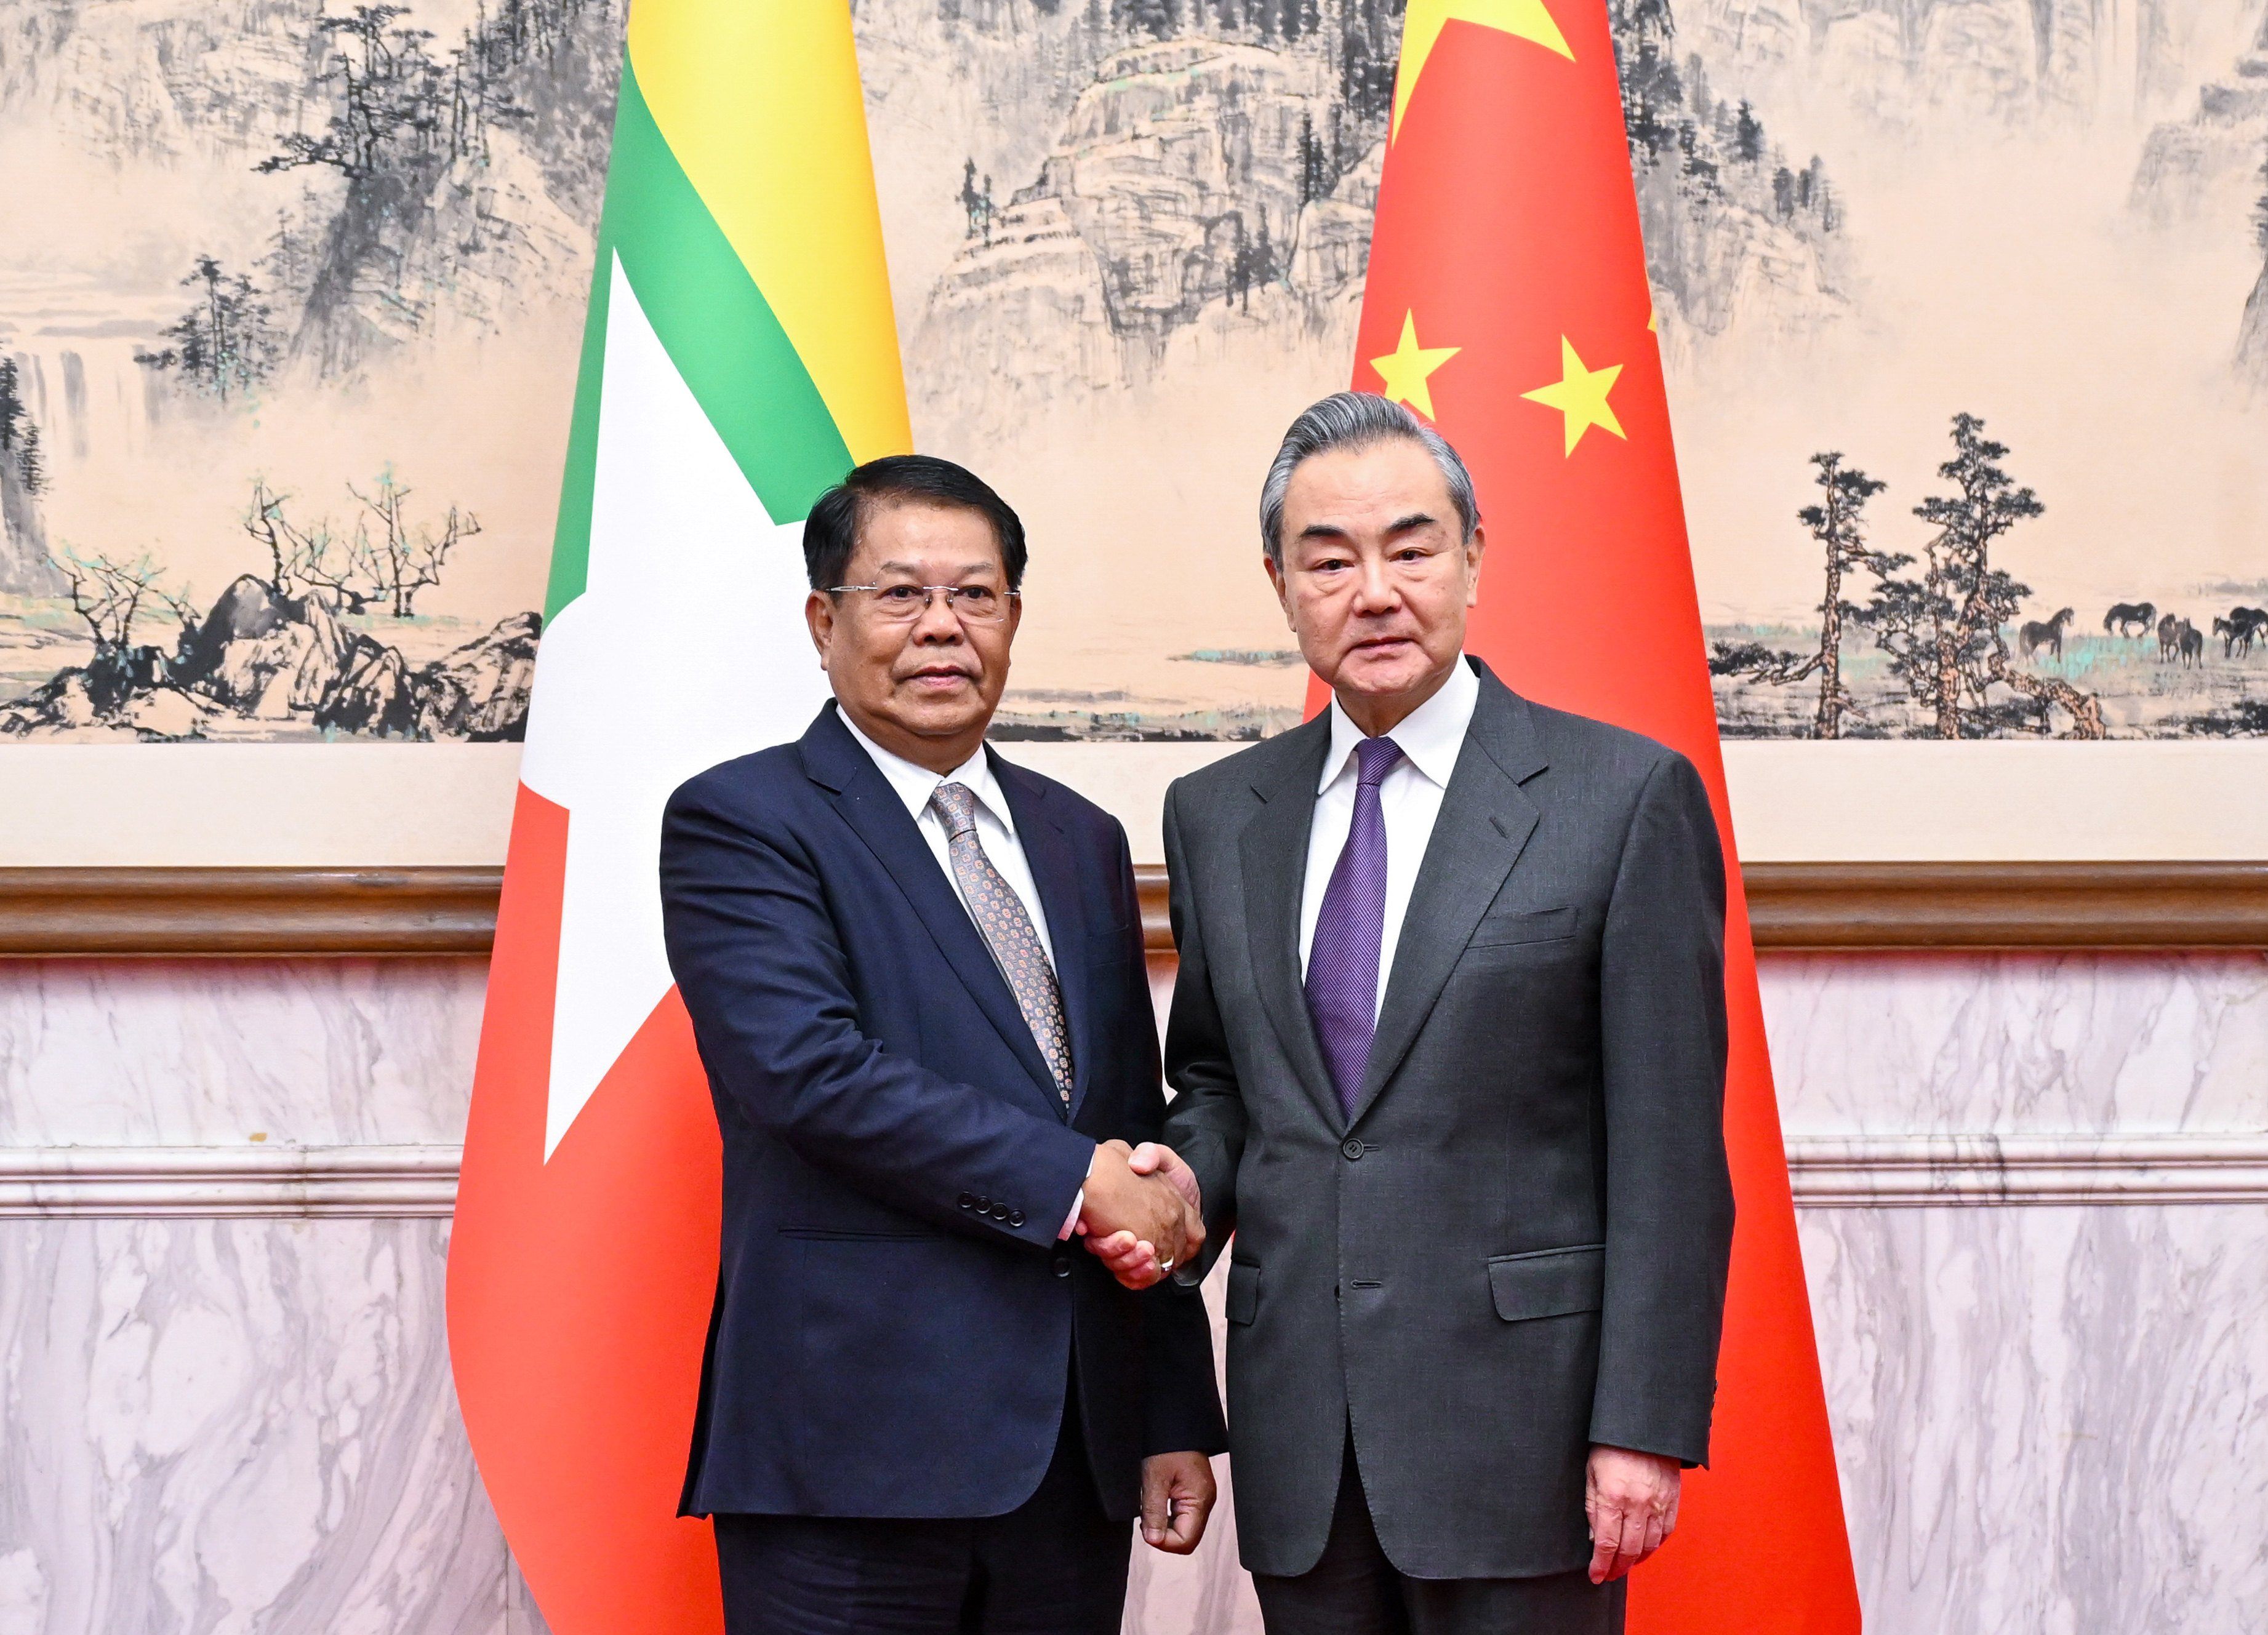 China’s top diplomat Wang Yi (right) meets Myanmar’s Deputy Prime Minister and Foreign Minister Than Swe in Beijing on Wednesday. Photo: Xinhua